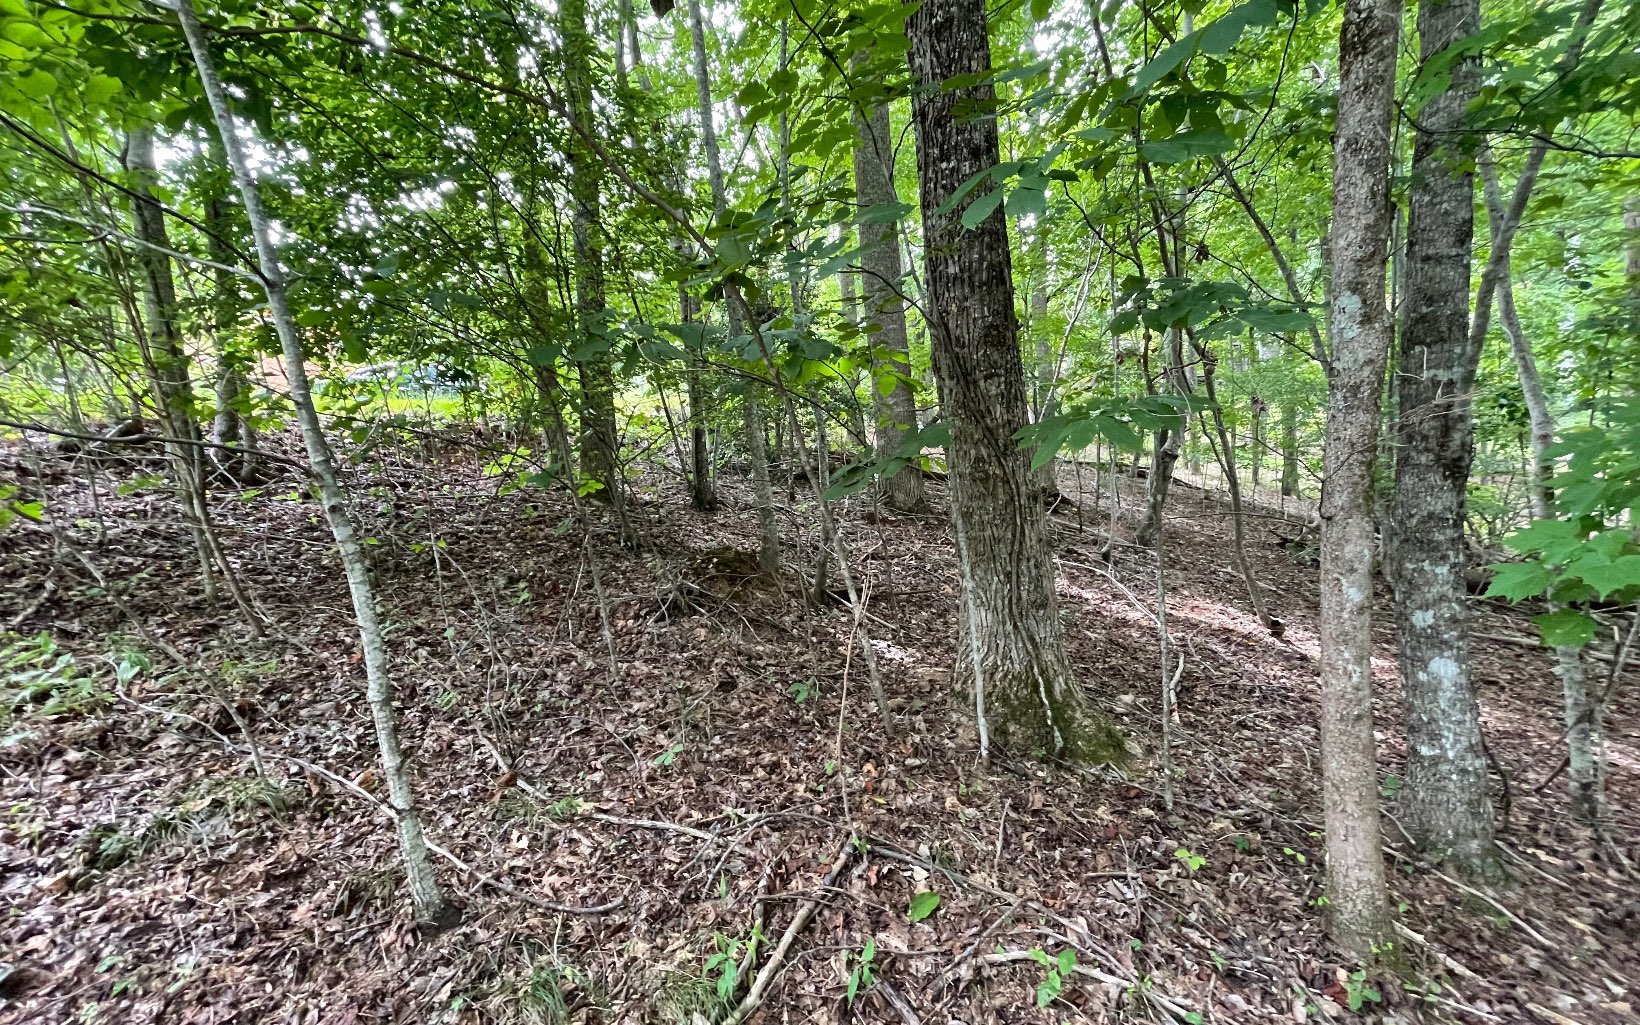 Located in a quiet well-established neighborhood, this lot offers year-round mountain views and a gentle build site with septic approval for a 2 or 3-bedroom home. Paved roads and underground utilities in place and ready for build. Close to Young Harris College, shopping and dining.